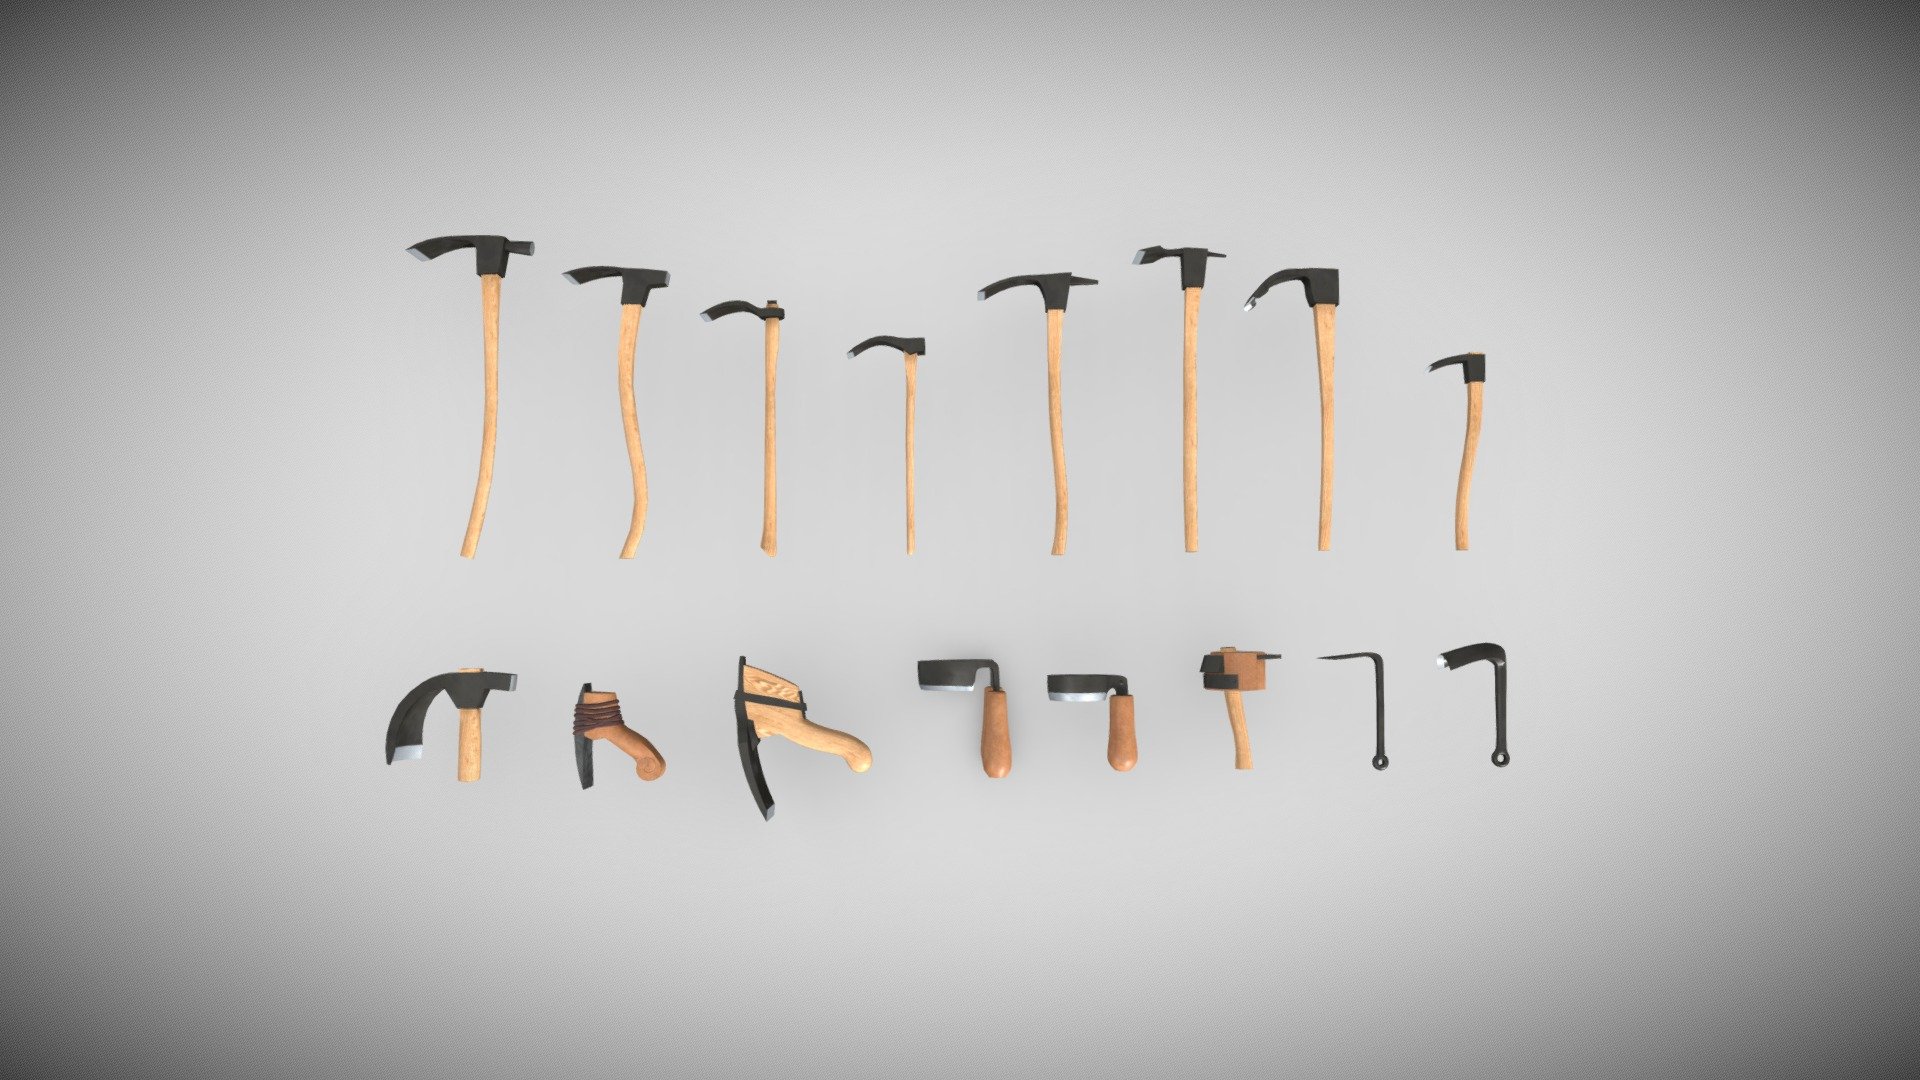 Modeled from Eric Sloane's Museum of Early American Tools.

Textured with CC0 Textures assets.

Made with Blender 3d model